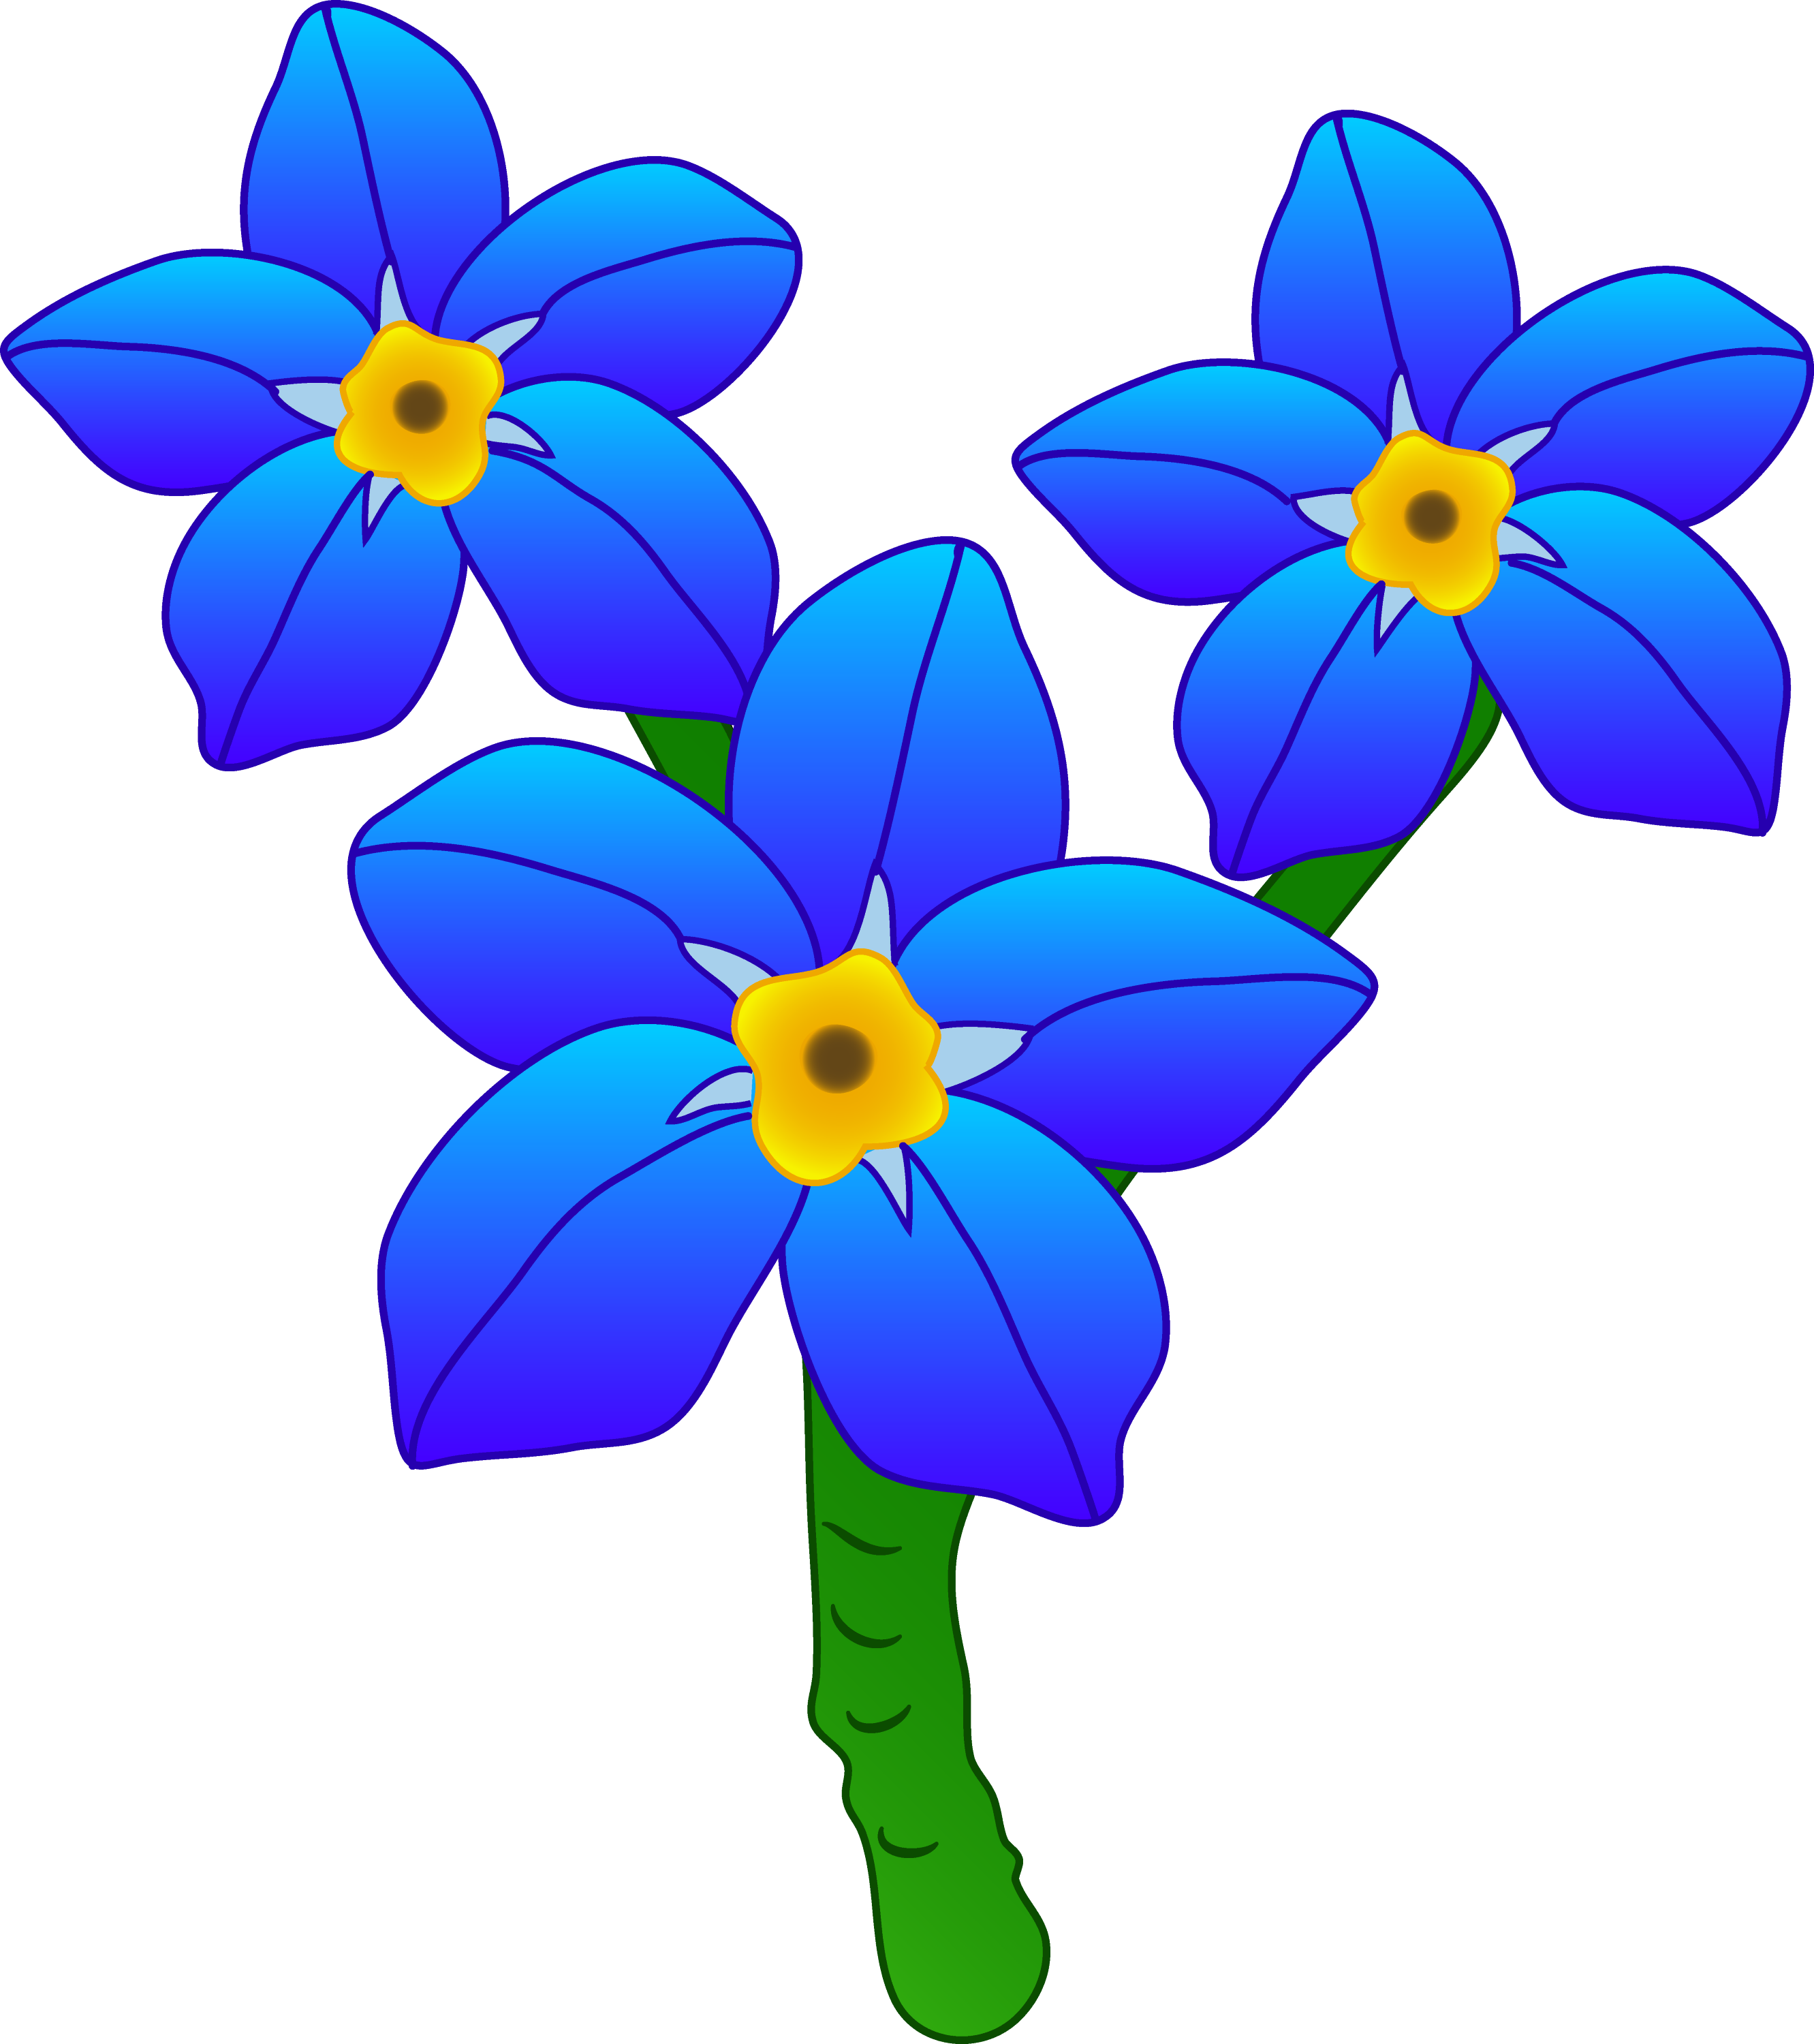 free clip art forget me not flower - photo #11